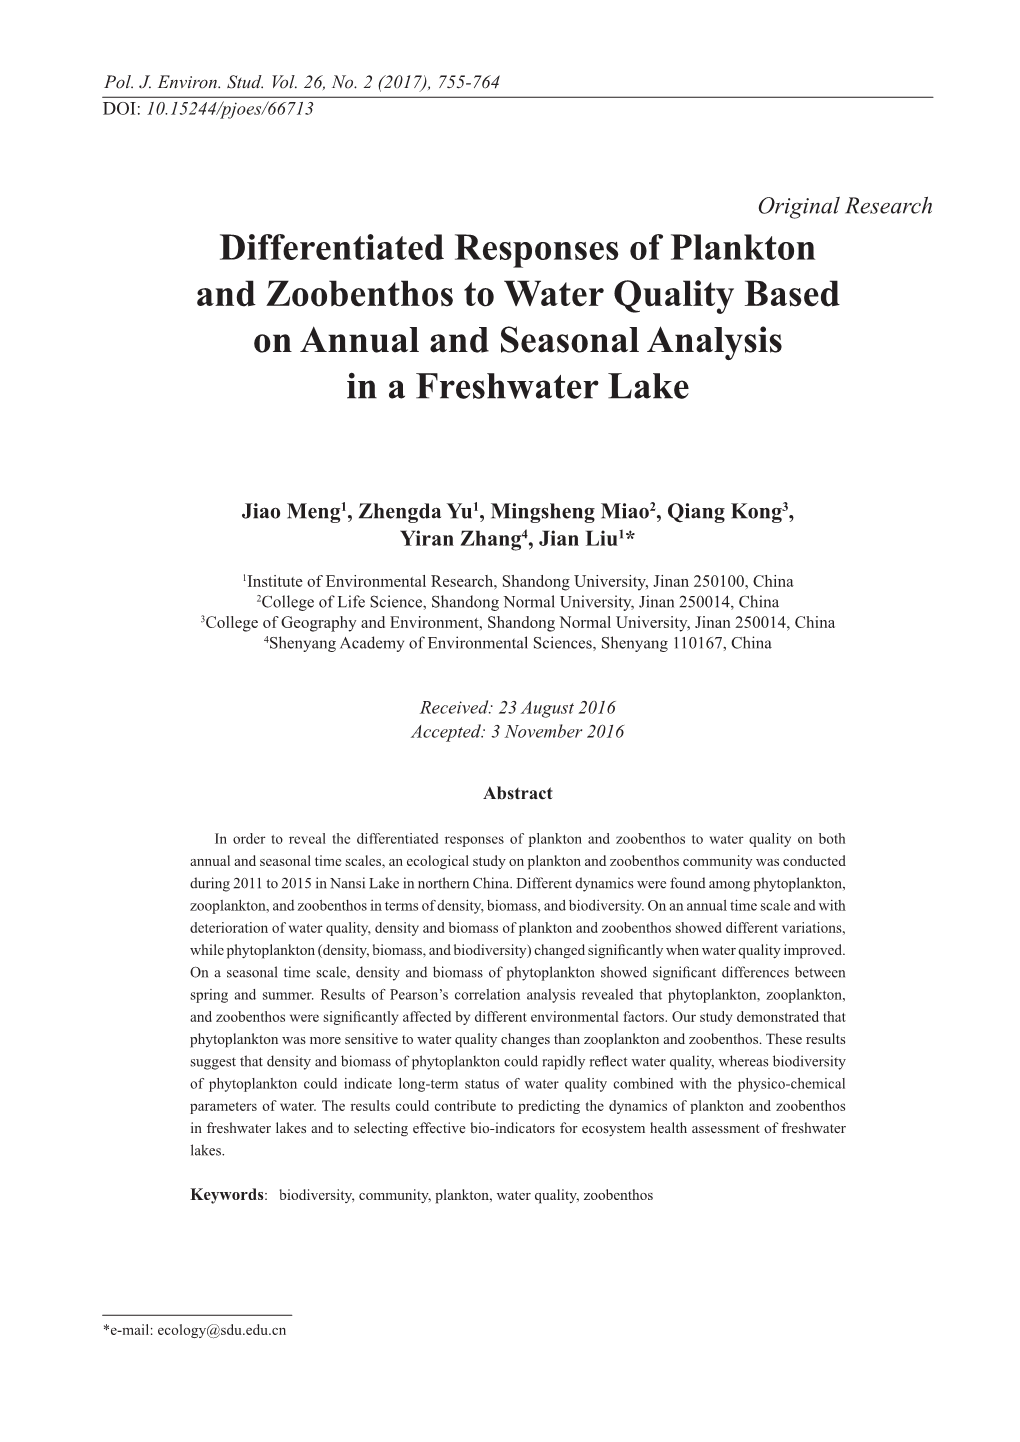 Differentiated Responses of Plankton and Zoobenthos to Water Quality Based on Annual and Seasonal Analysis in a Freshwater Lake